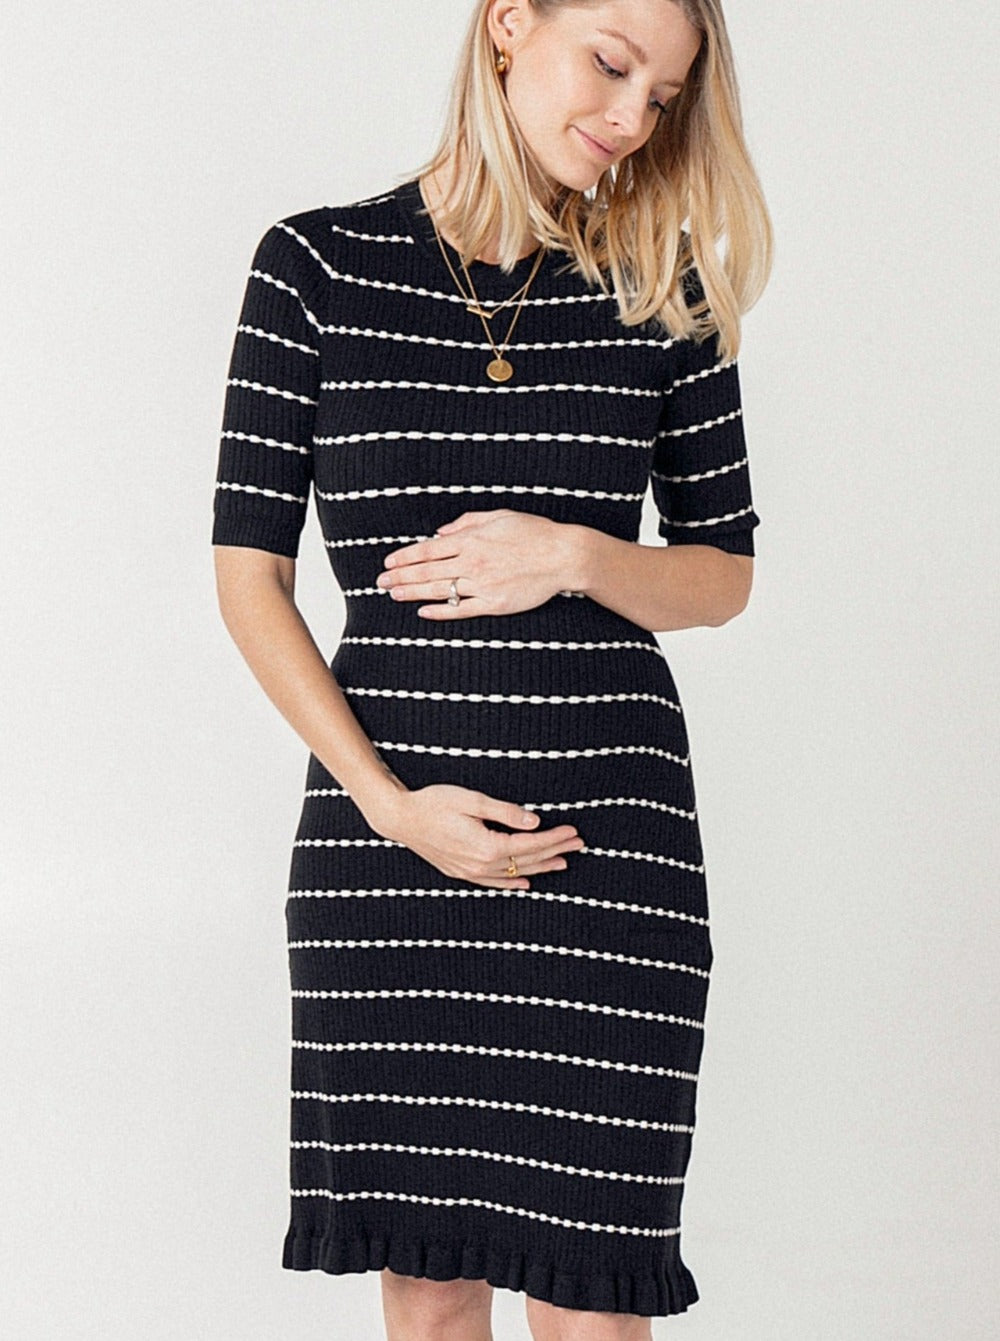 Petite Maternity Clothes for Petite Moms - MARION Maternity – MARION ...